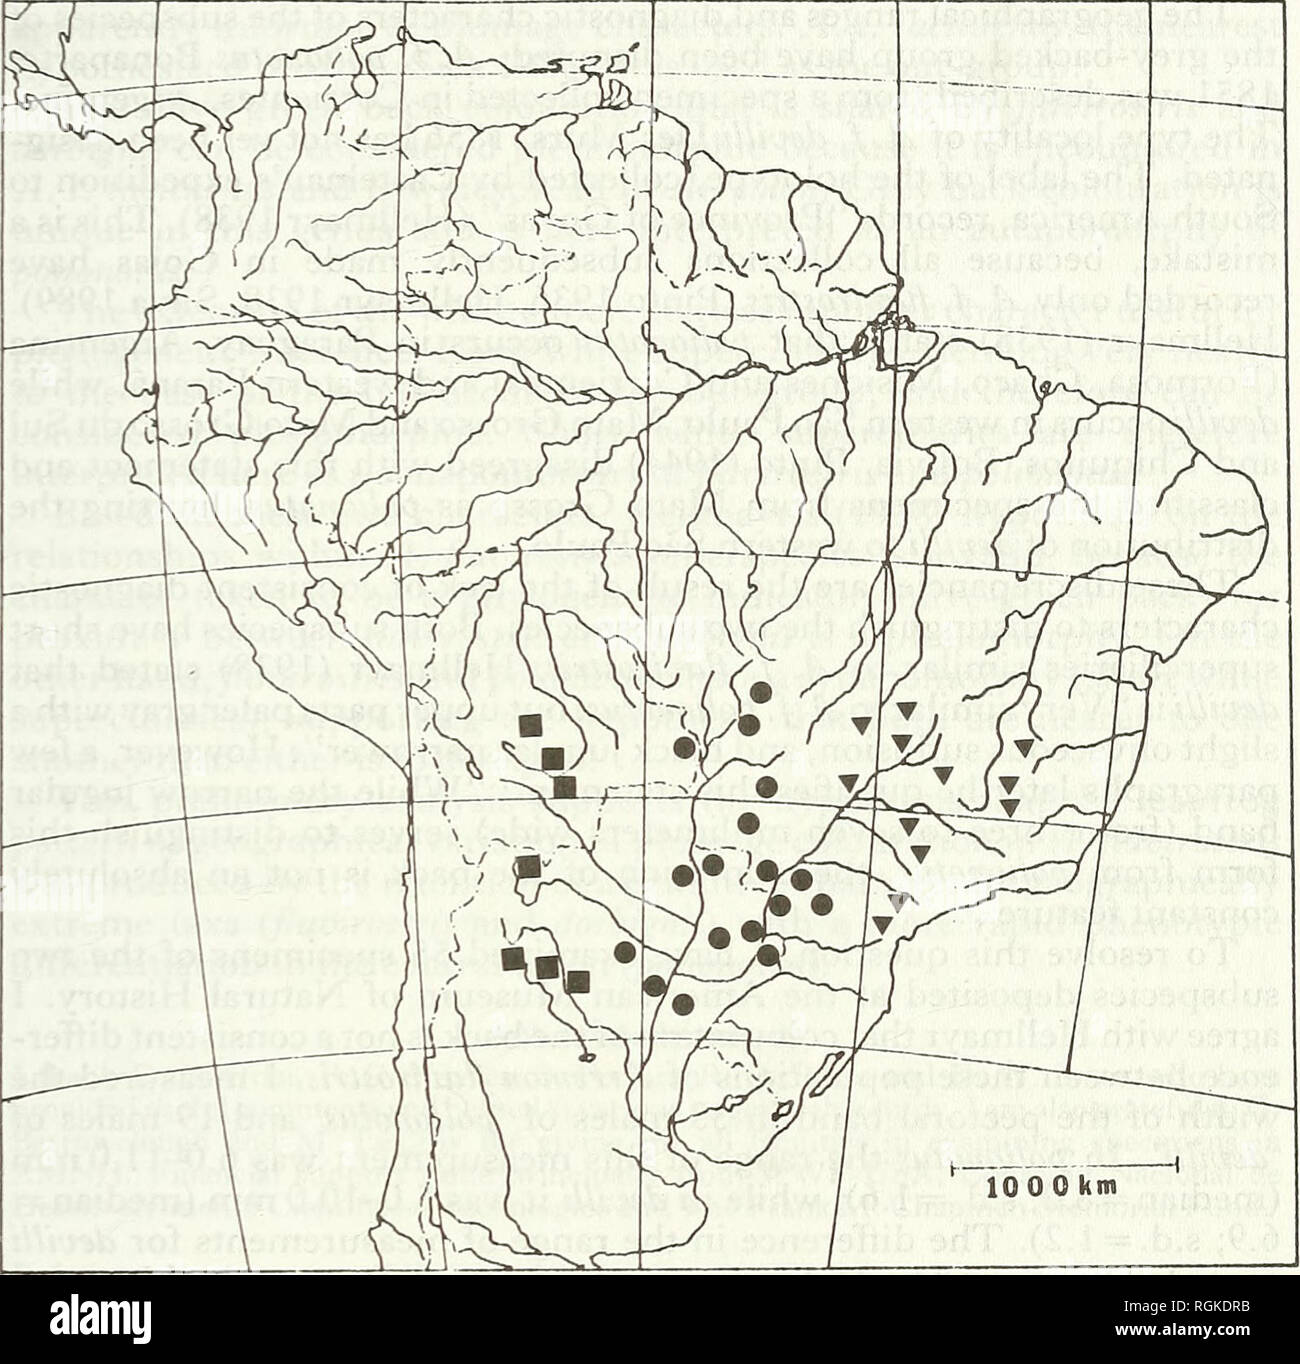 . Bulletin of the British Ornithologists' Club. Birds. Jf. M. Cardoso da Siha 153 Bull.B.O.C. 1991 111(3). Figure 1. Distribution of Arremon flavirostris: T, A. f. flavirostris; #, A. f. polionotus; â . A.f. dorbignii. The last comprehensive review of the geographical variation of A. flavirostris was carried out by Hellmayr (1938), who recognized two groups of subspecies: the green-backed group {flavirostris and dorbignii) and the grey-backed group {polionotus and devilli). The taxonomy of the green-backed group is well resolved. A. f. flavirostris Swainson, 1837 is characterized by white supe Stock Photo